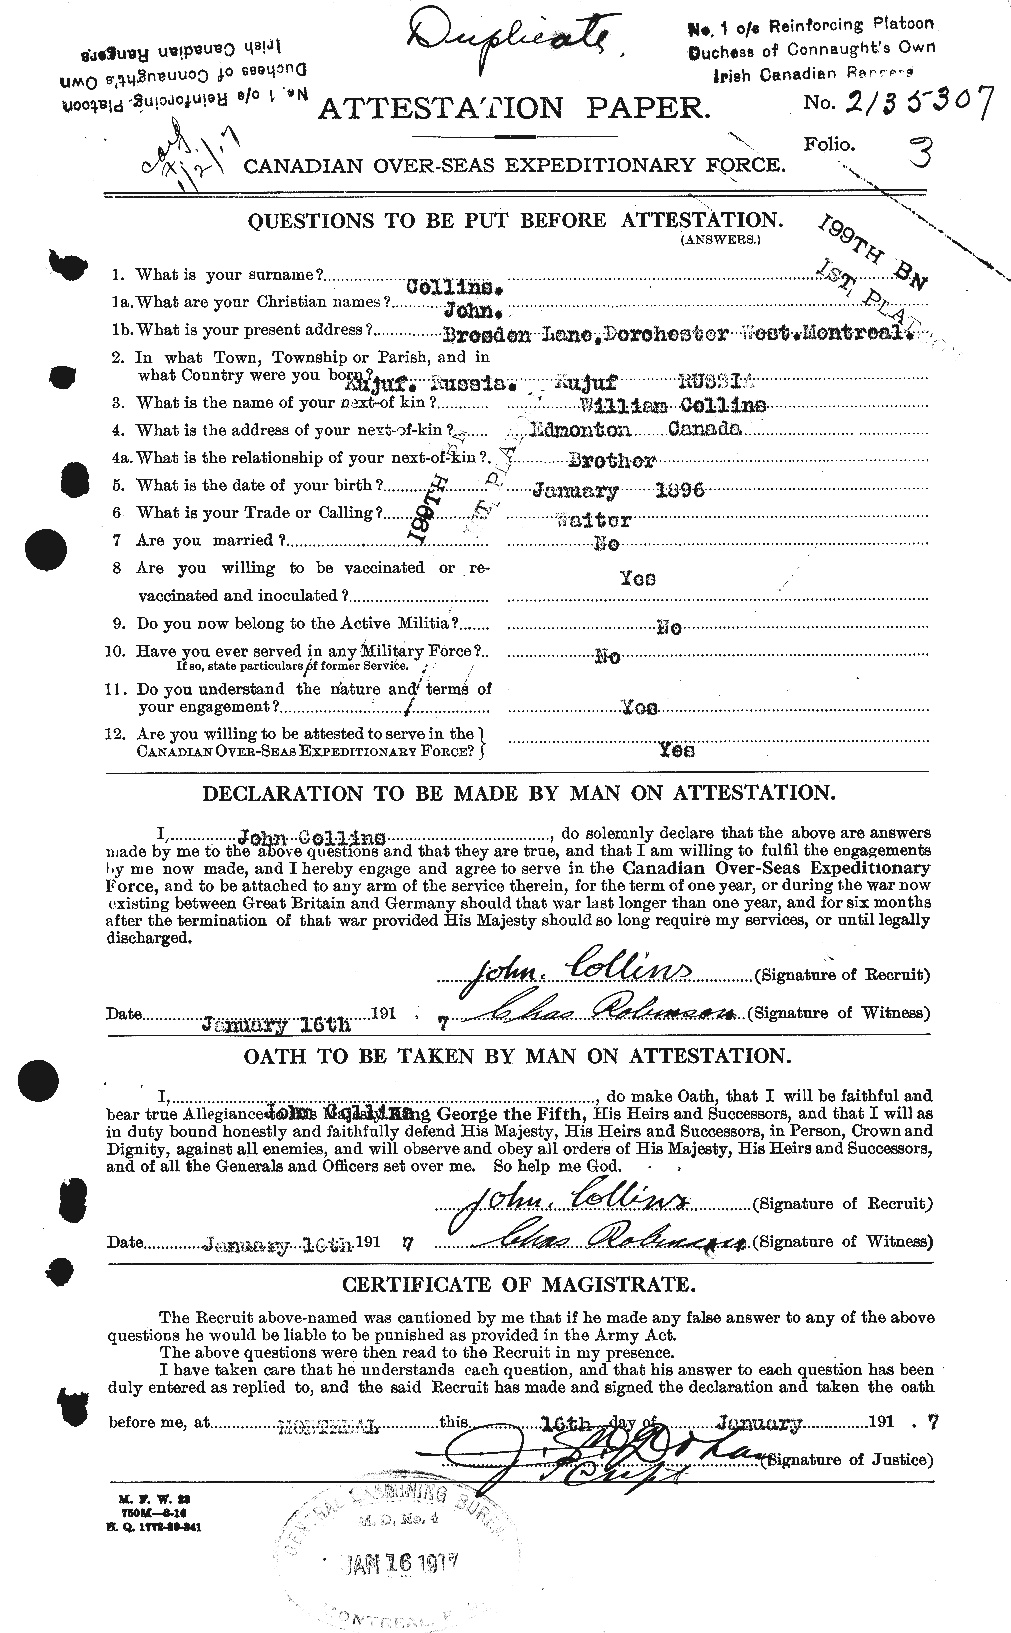 Personnel Records of the First World War - CEF 069814a